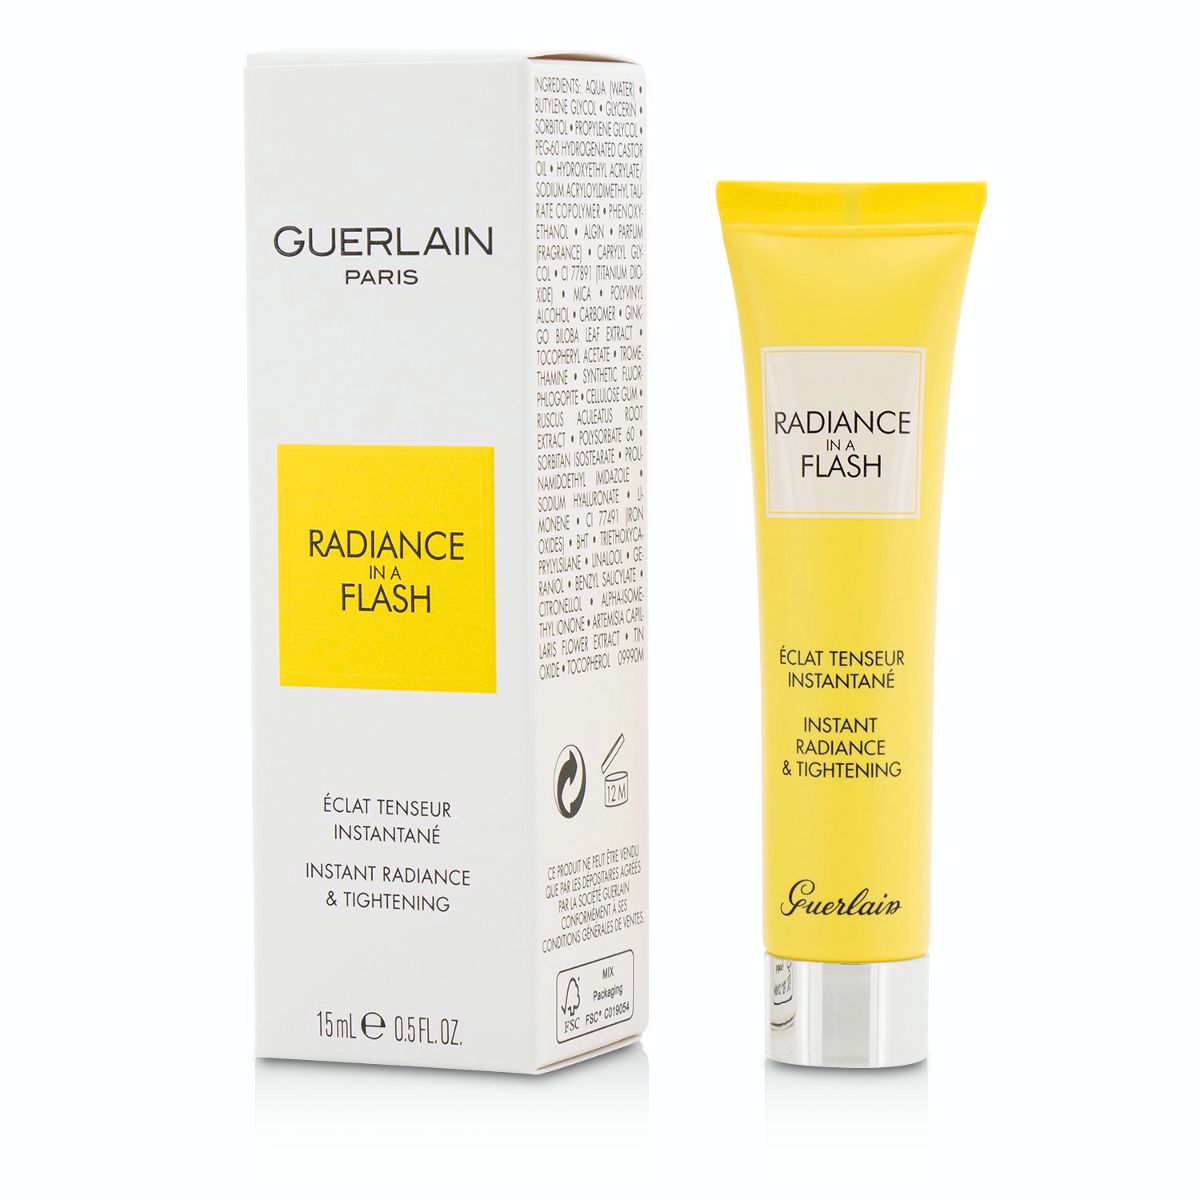 Radiance In A Flash Instant Radiance  Tightening 61220 Guerlain Image